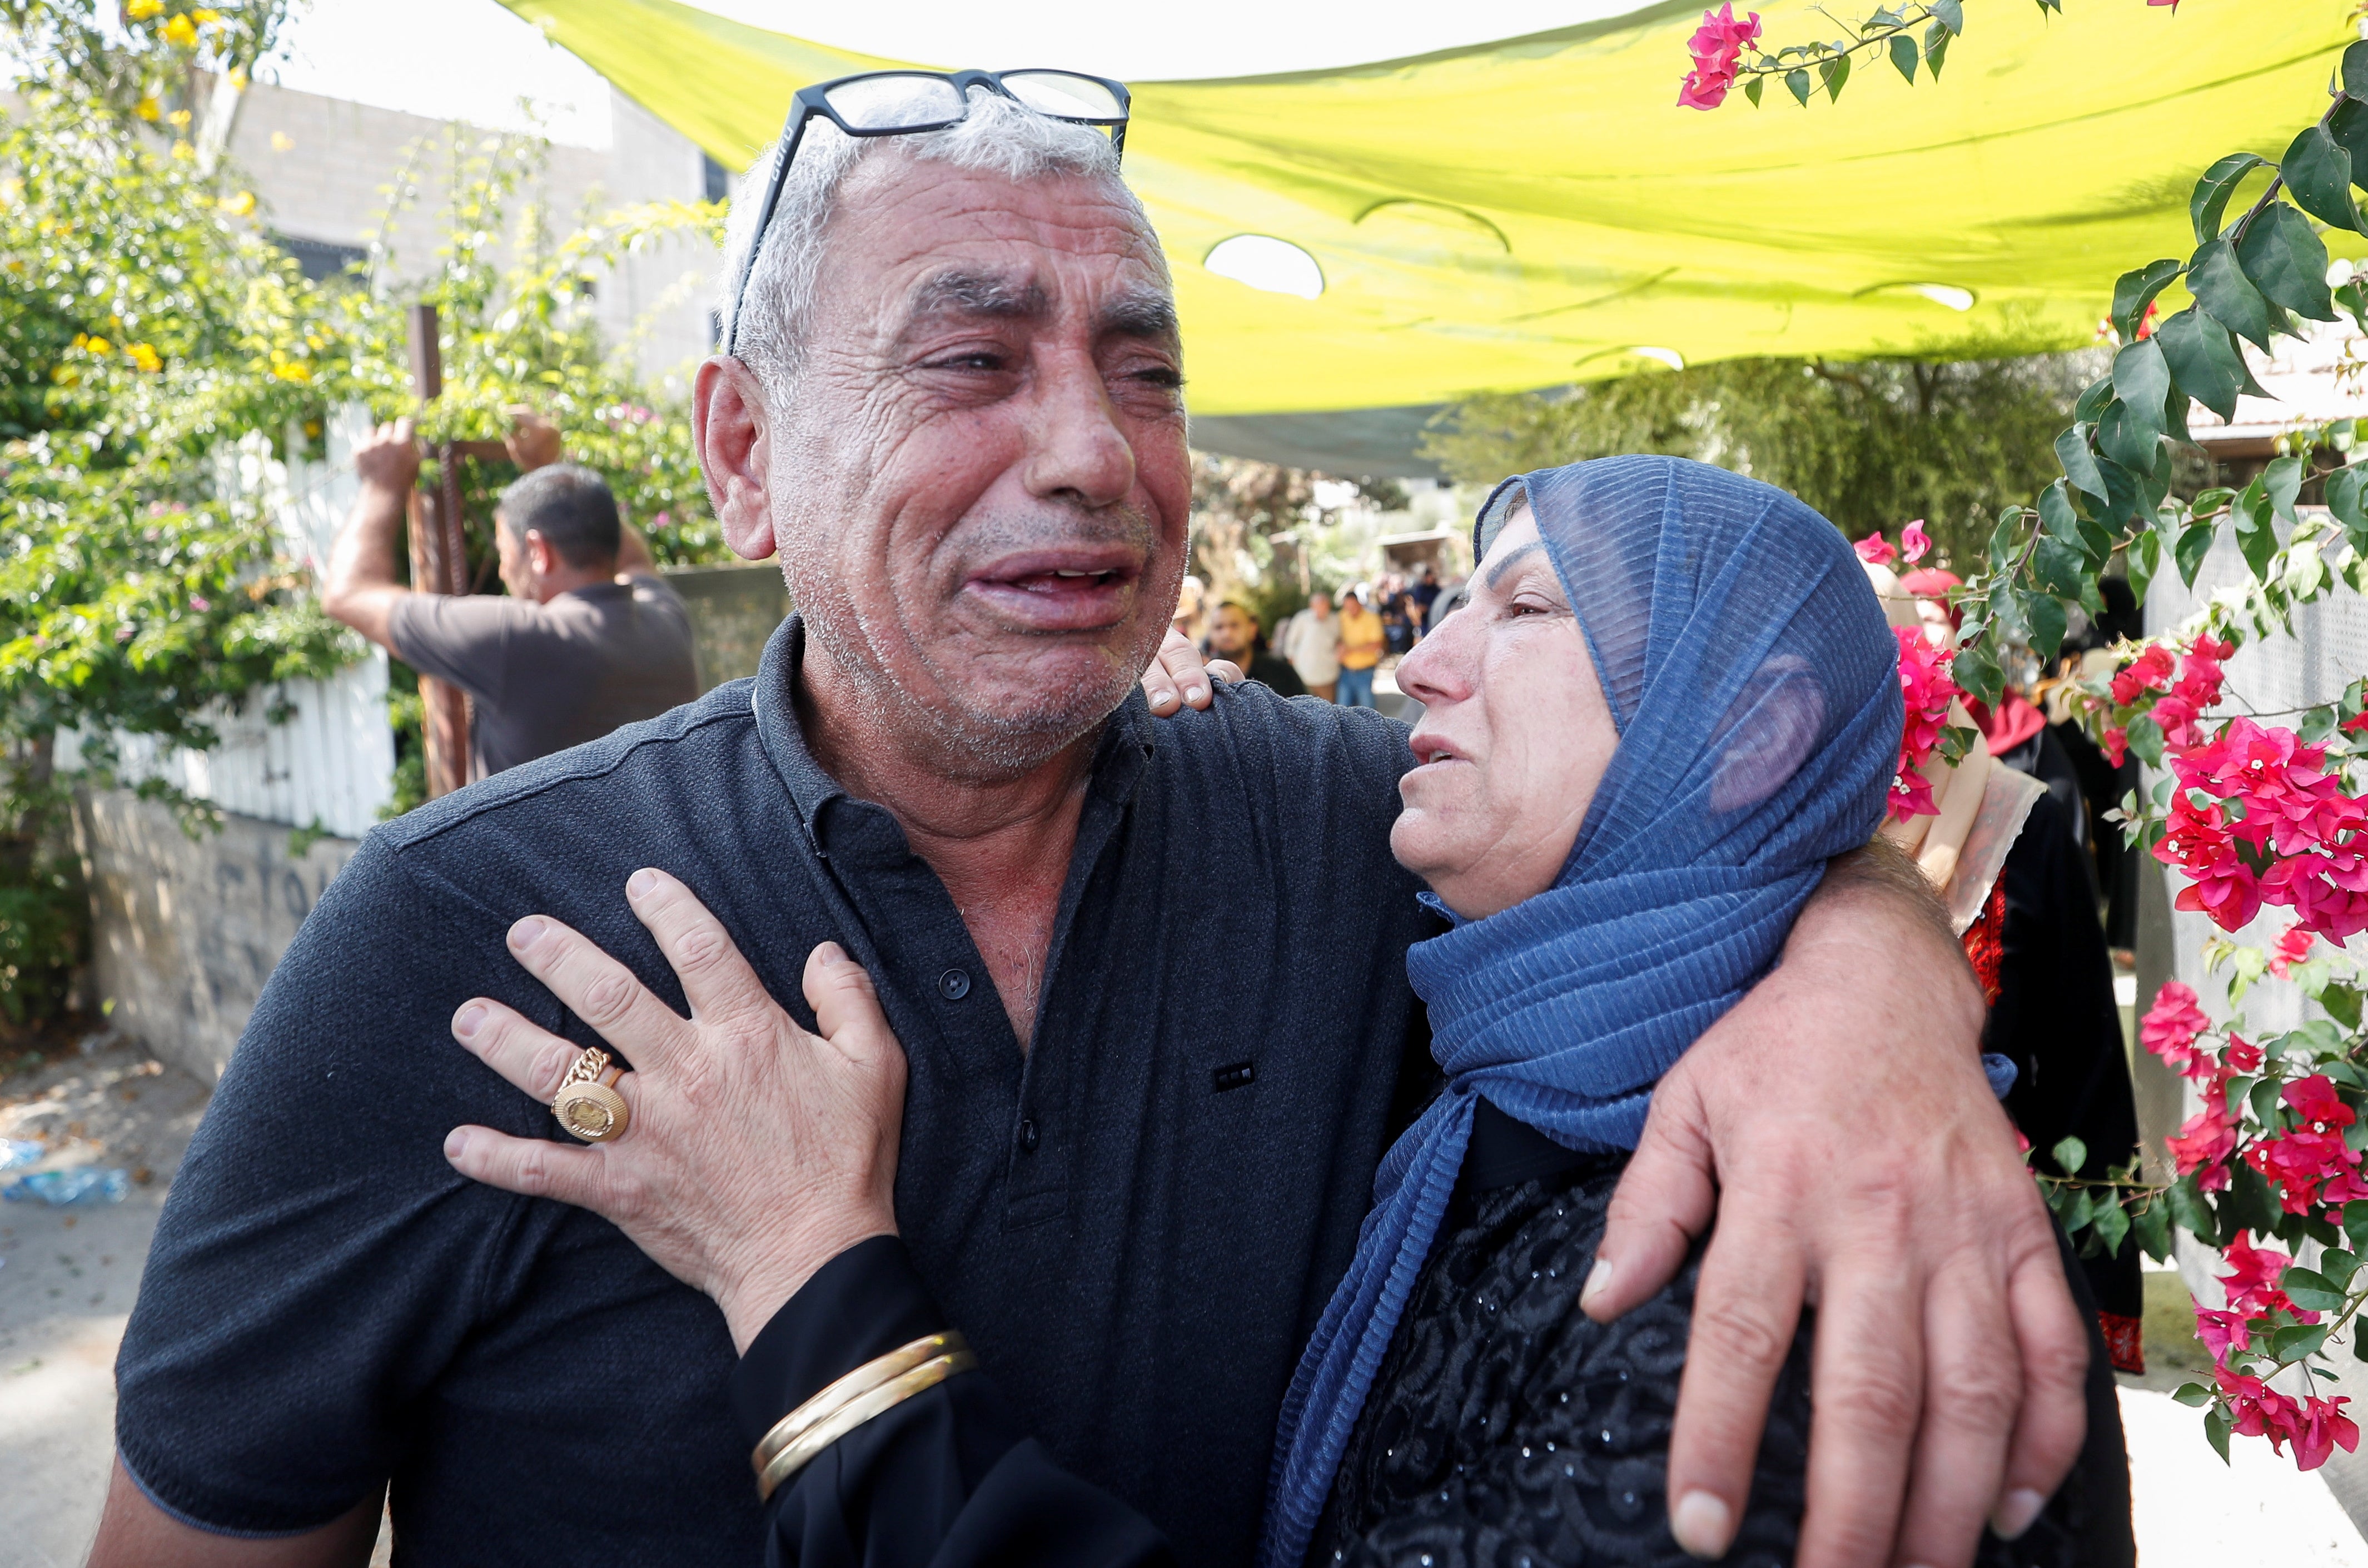 Mourners cry during the funeral of Palestinian Raed Jadallah, who was shot dead by Israeli forces, according to health ministry, near Ramallah in the Israeli-occupied West Bank